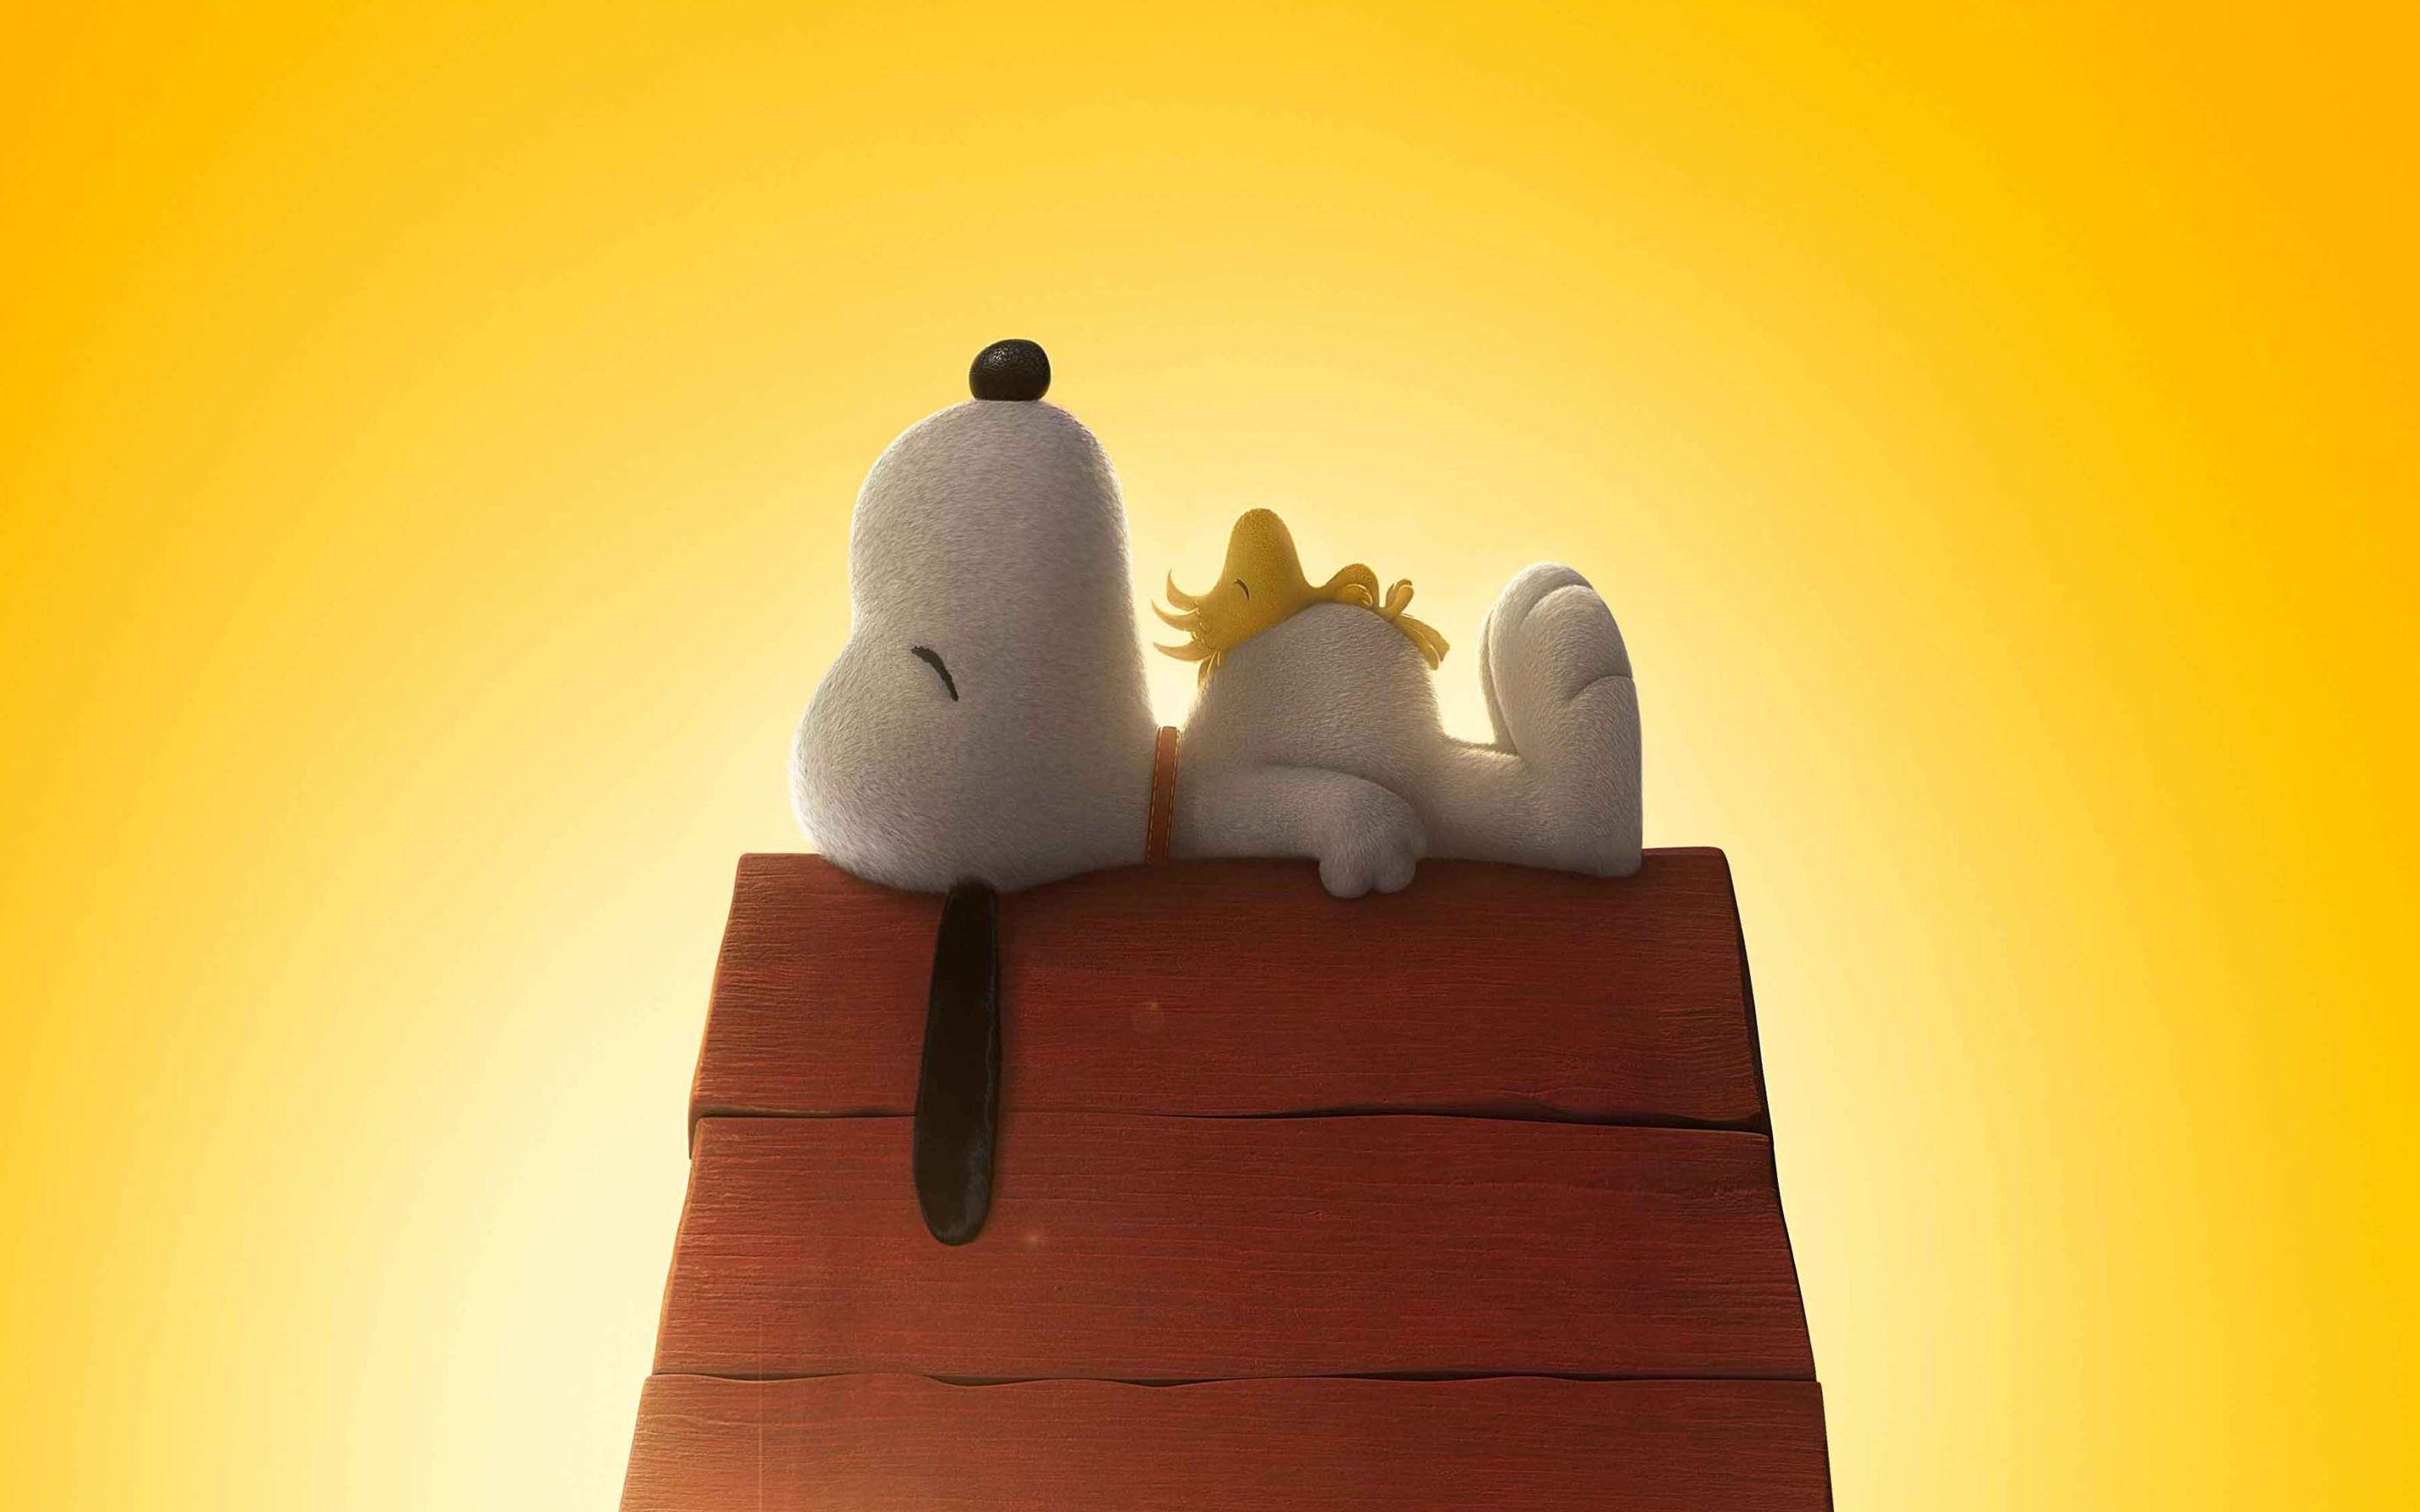 Peanuts 2015 Movie Wallpapers HD Backgrounds